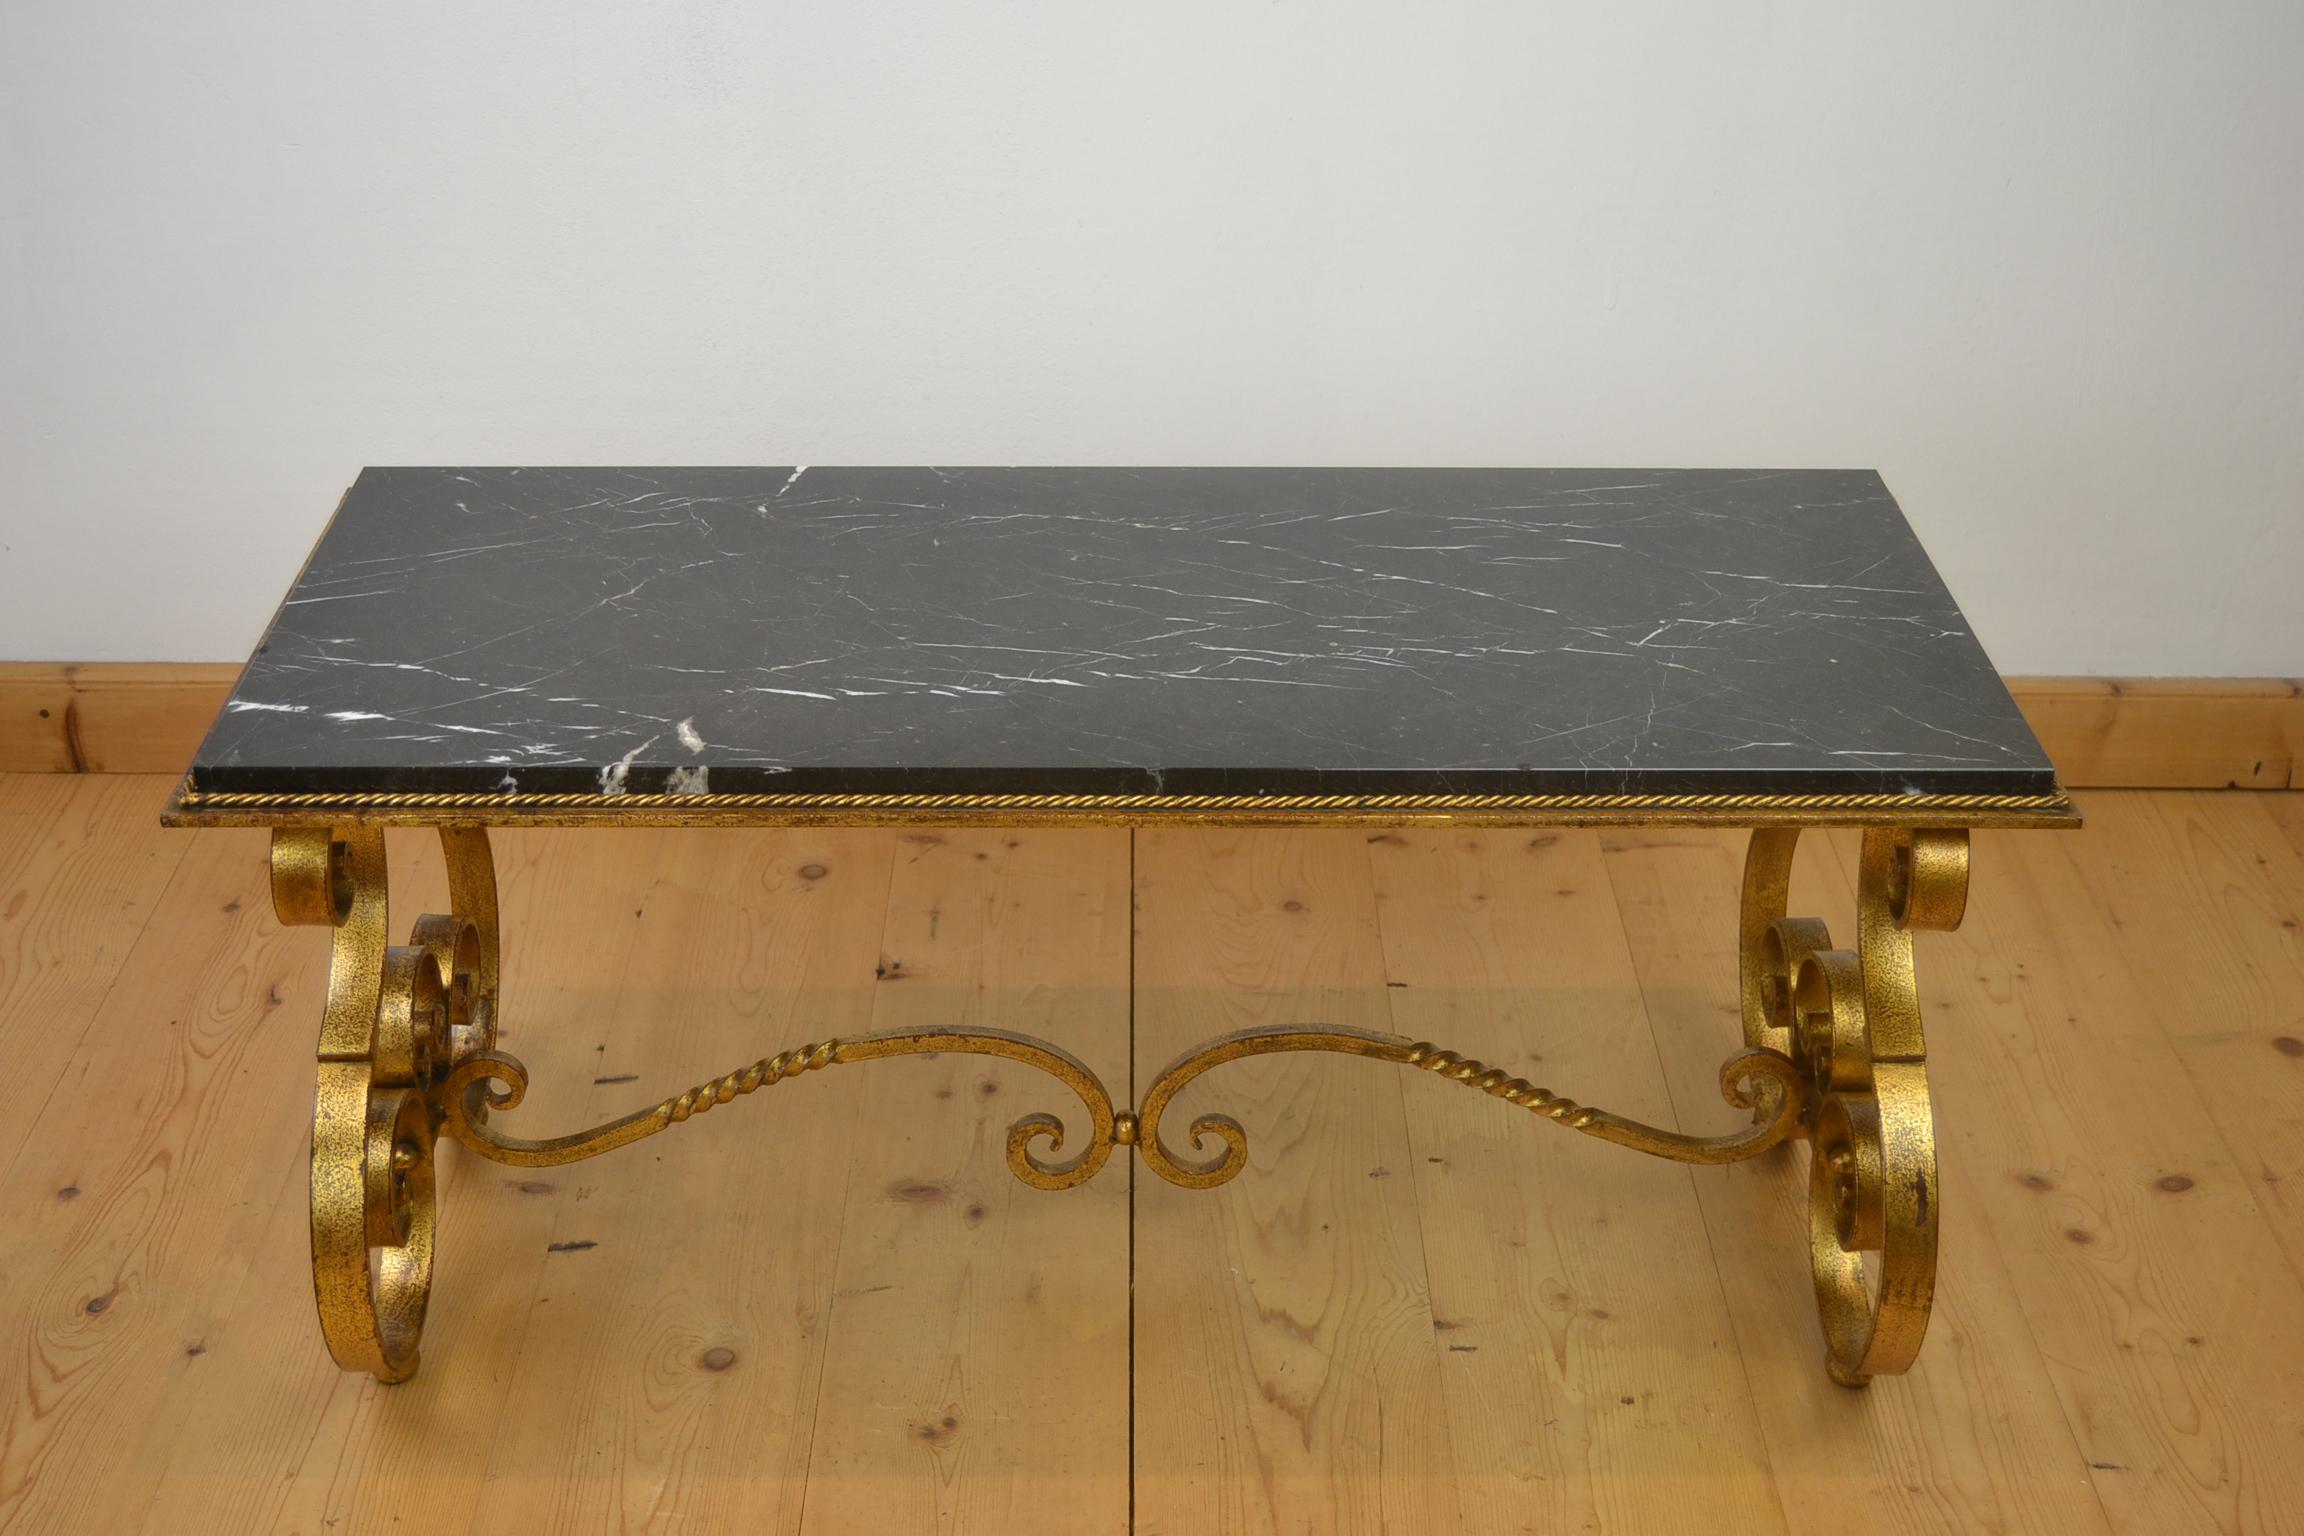 fFrench coffee table of wrought iron with a marble top from the 1950s.
This great coffee table has a curled gilded wrought iron base with a polished black vained marble top or tray. Around the marble top you have a metal twisted cord.
A French